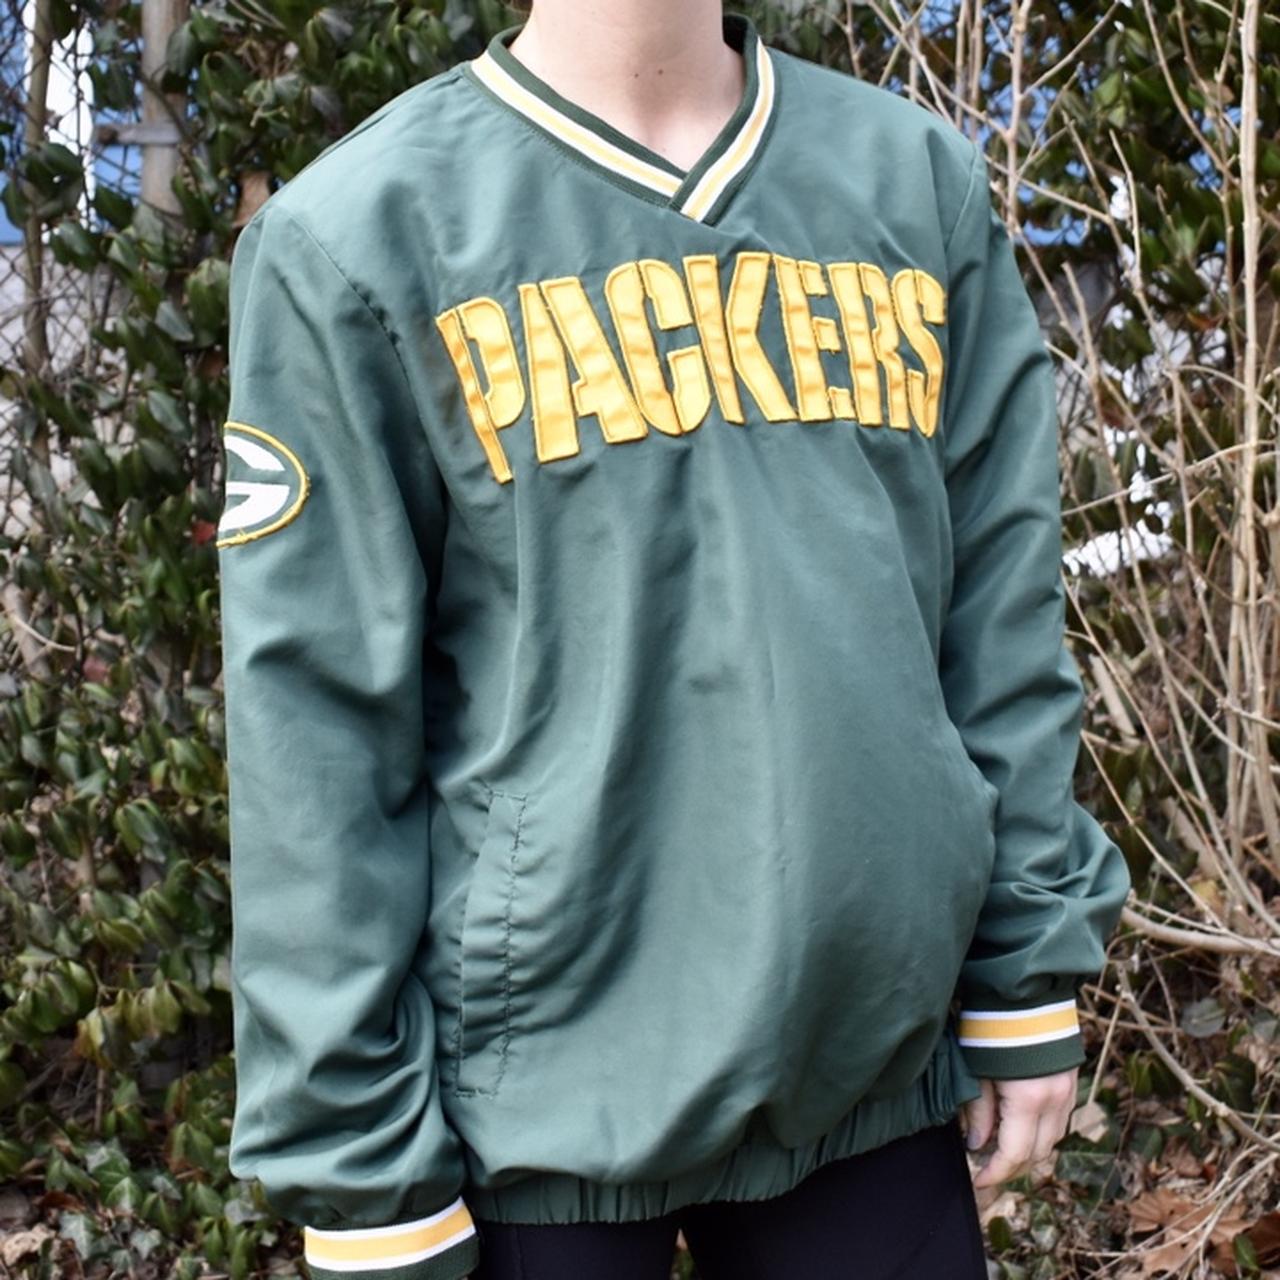 Product Image 1 - Vintage Packets Windbreaker

Authentic NFL

Size: Small
Condition: